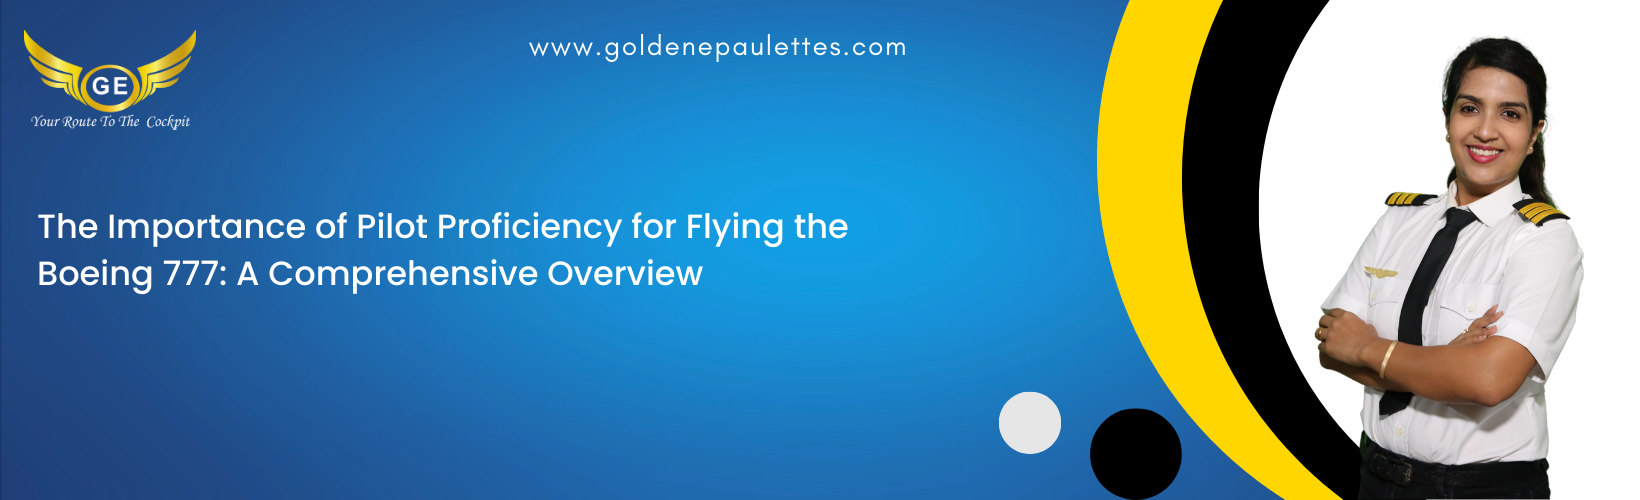 The Boeing 777 and Pilot Proficiency